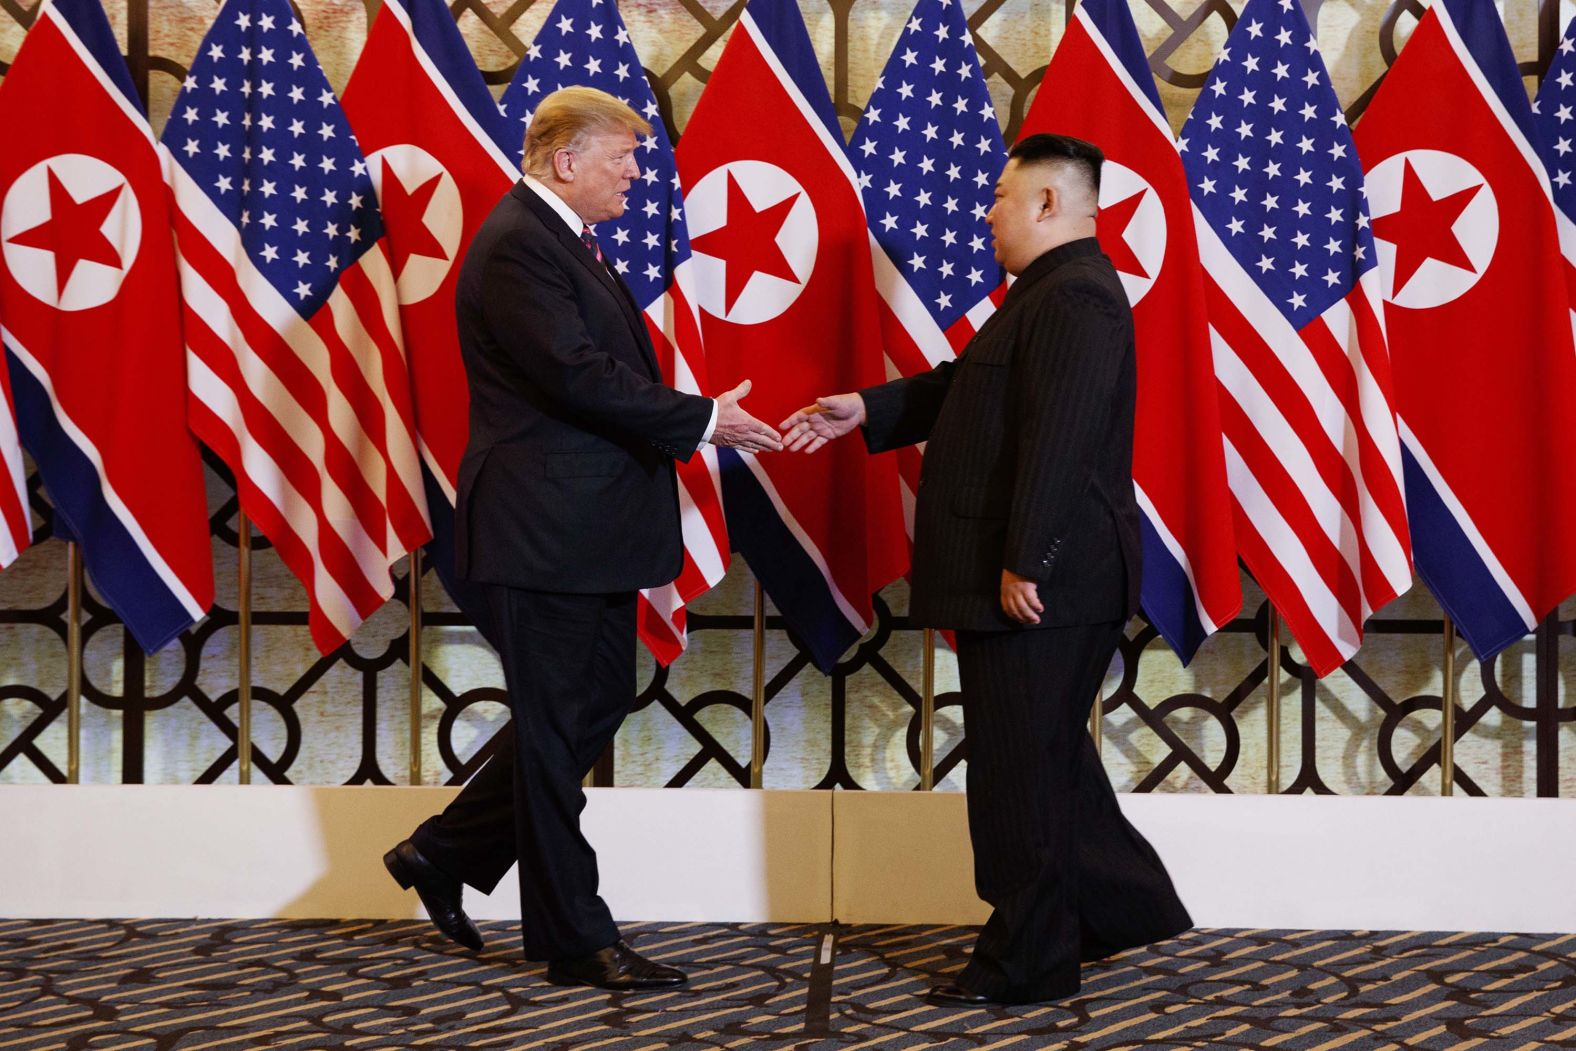 Trump and Kim greet each other before having dinner together on February 27. It was the first time they had seen each other since their previous summit in June.